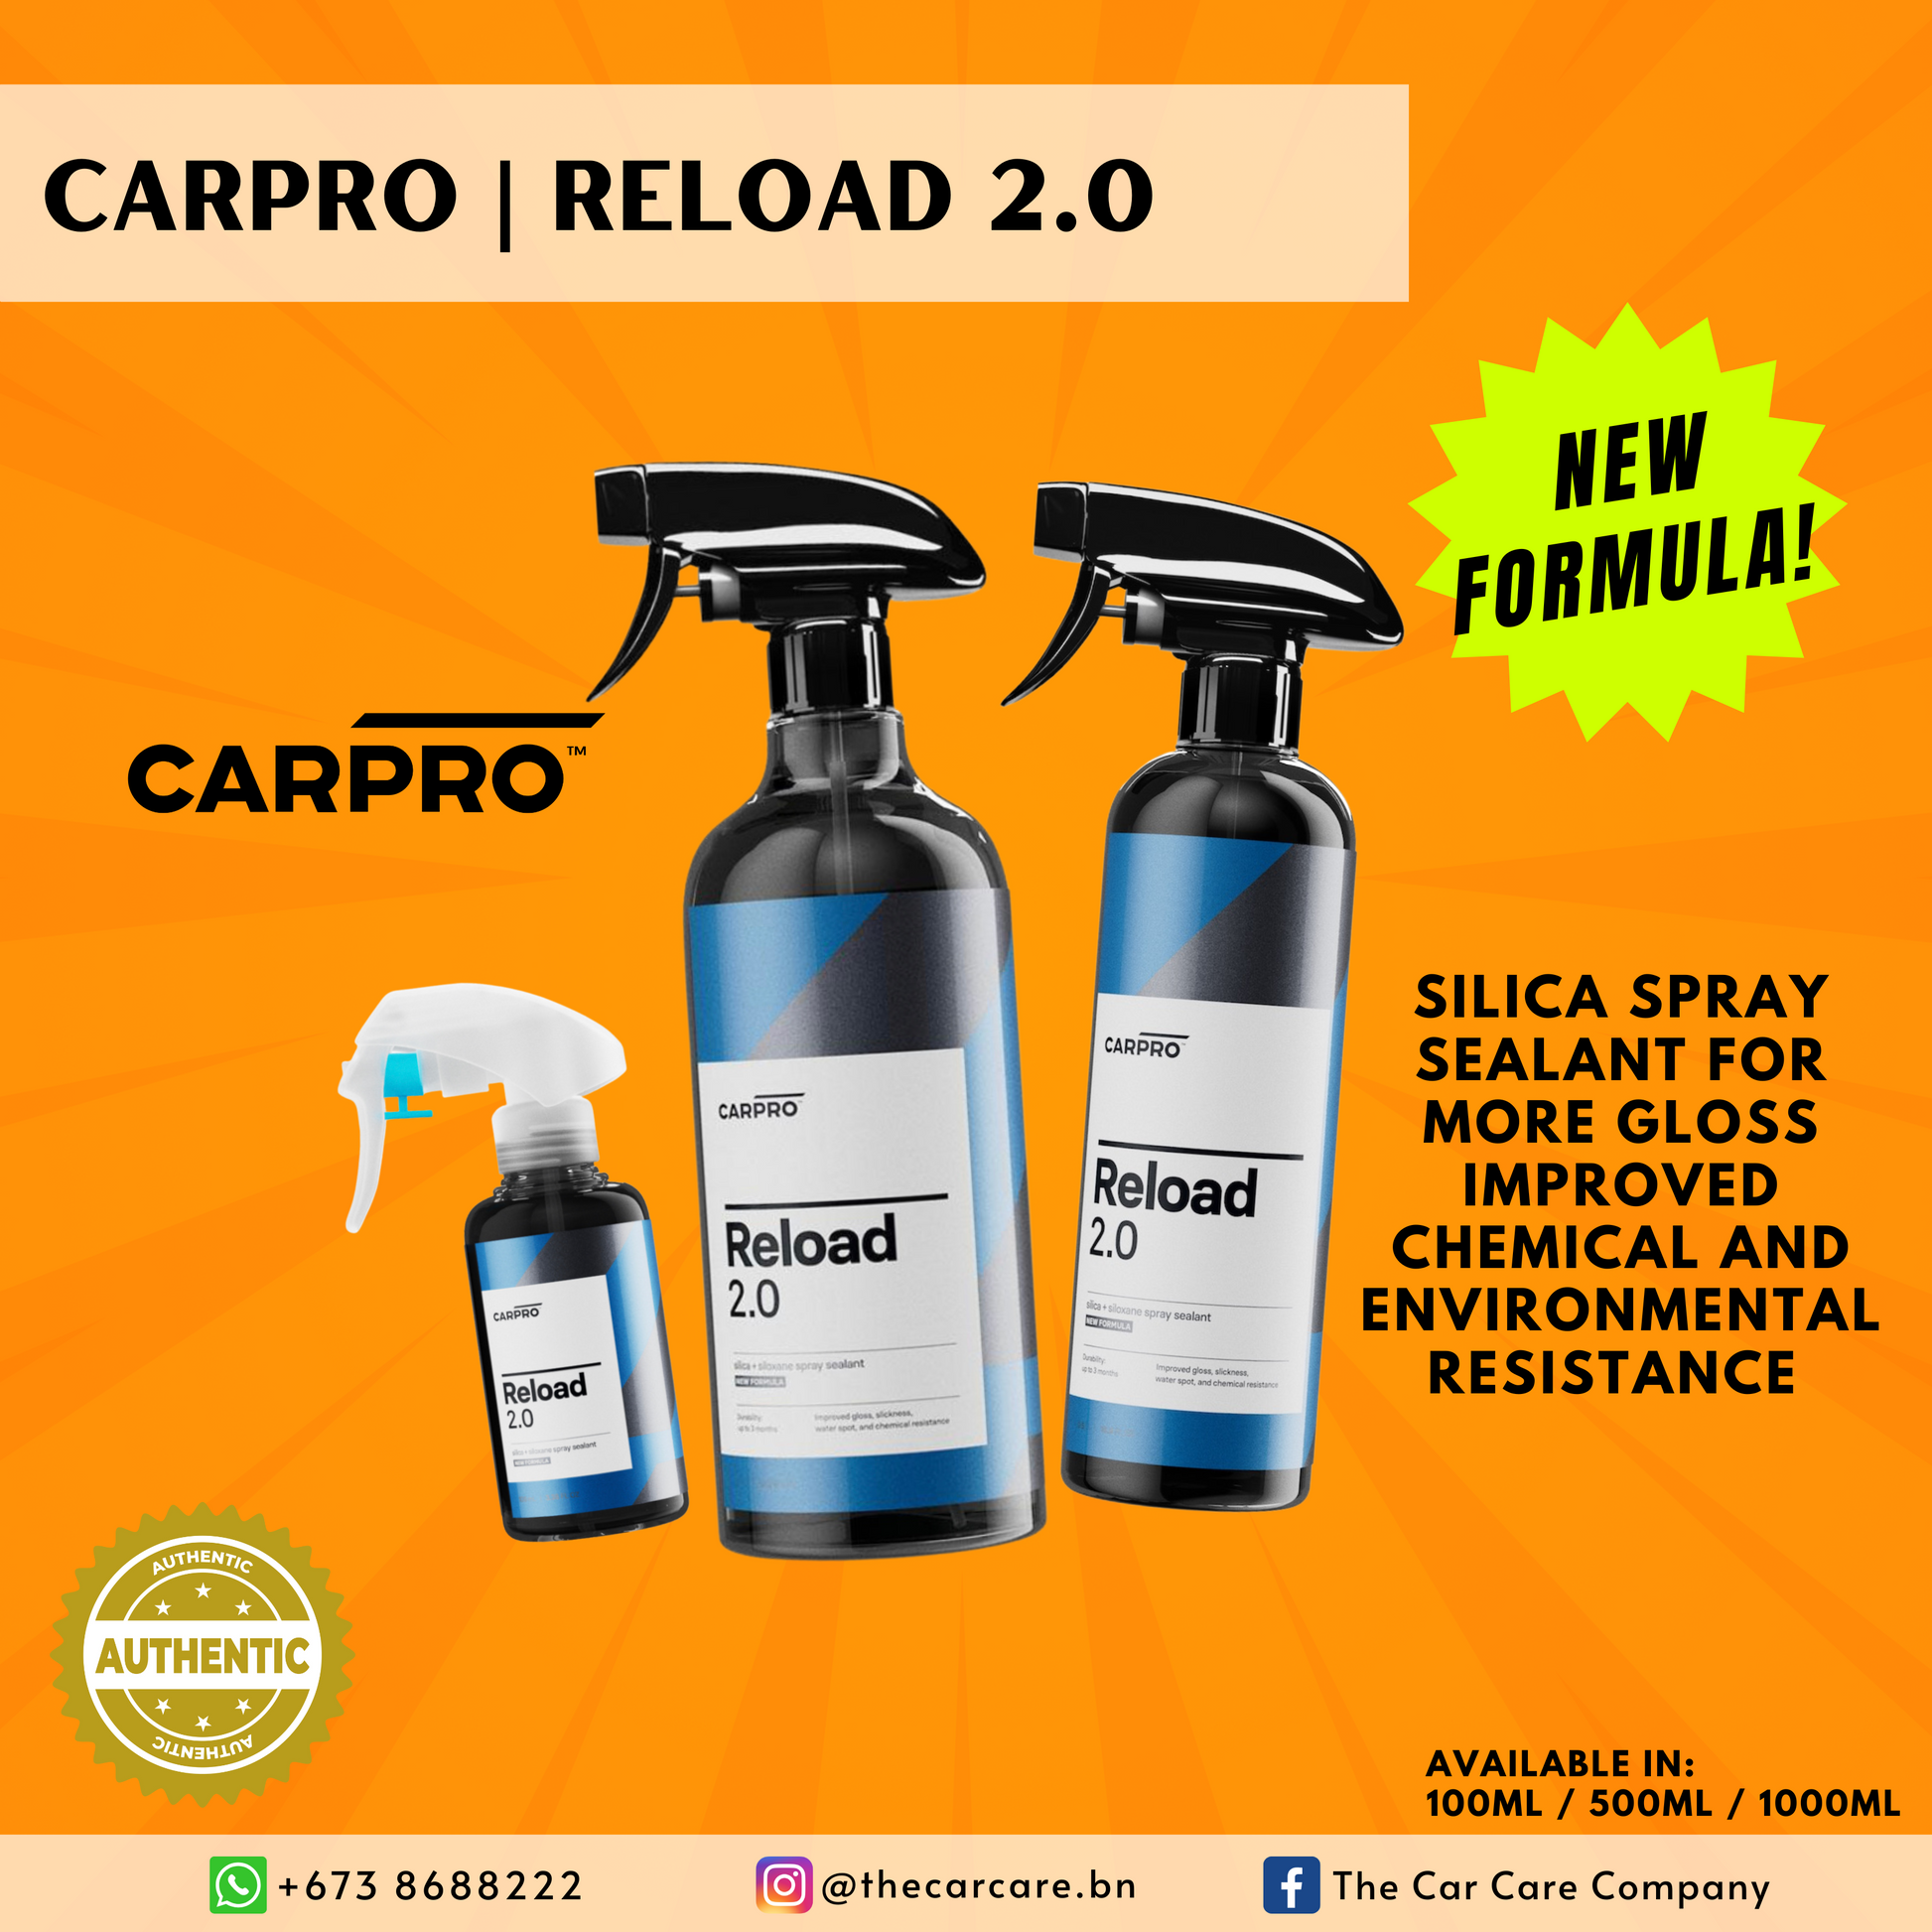 Reload 2.0 – The Car Care Company